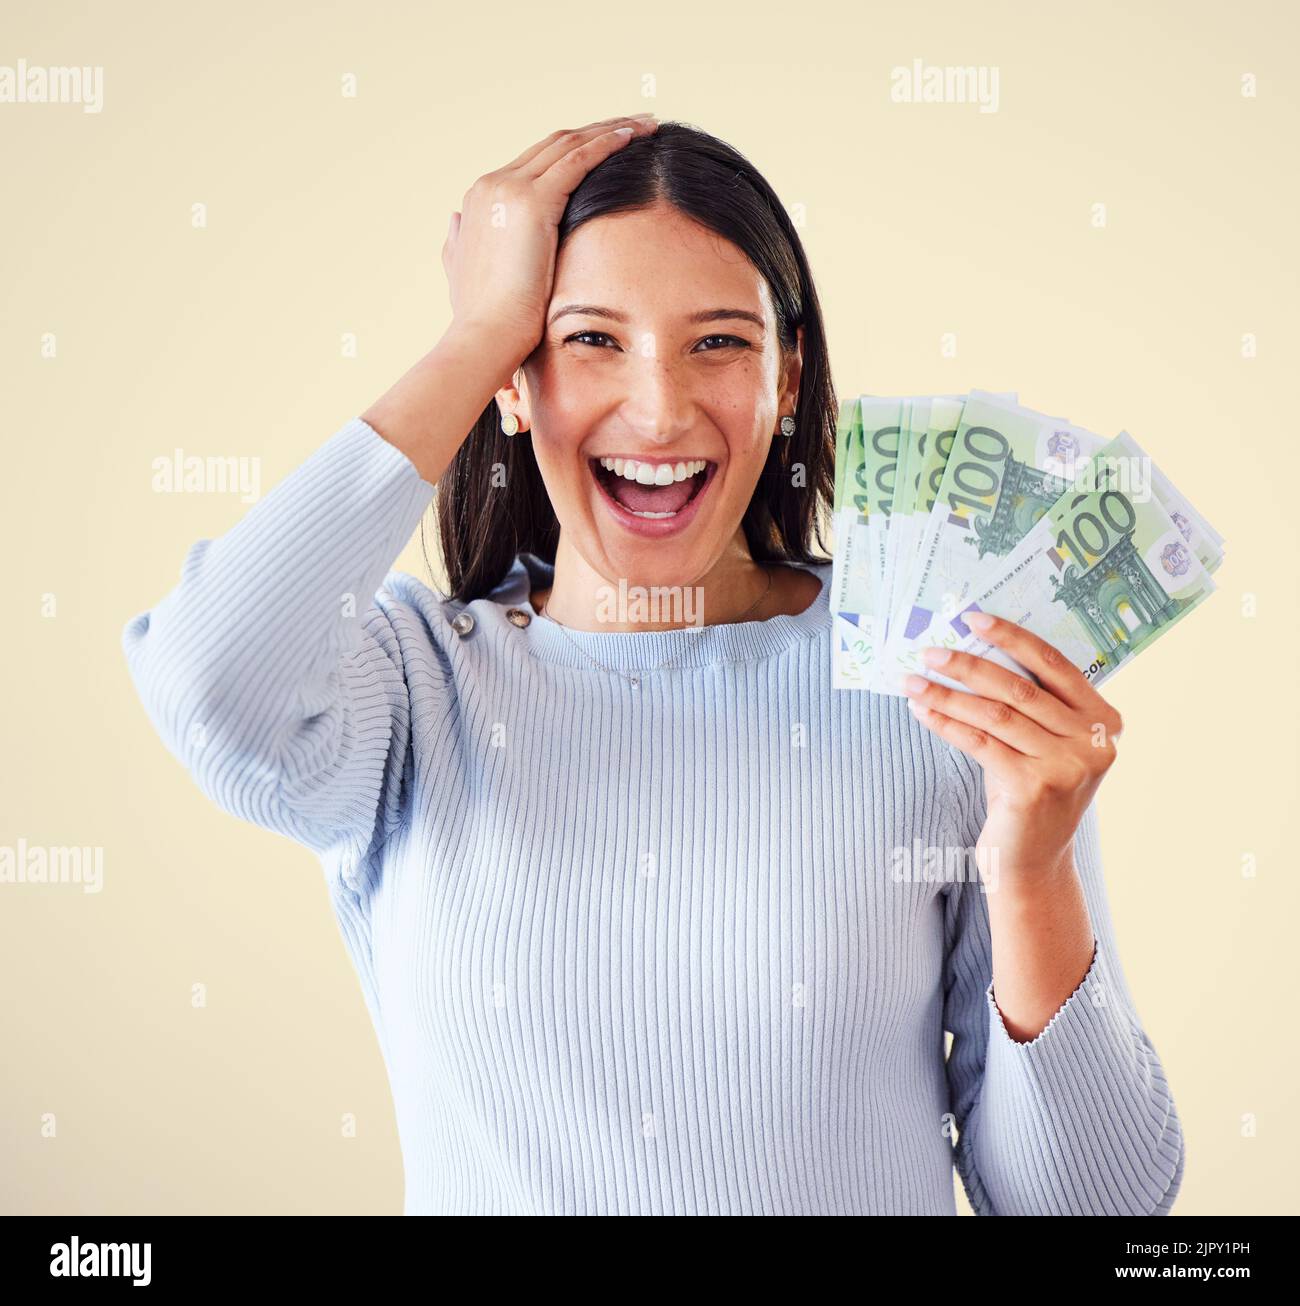 Woman celebrating success, winning money or lottery victory, holding cash or banknotes in hand. Portrait of excited, happy and proud winner screaming Stock Photo